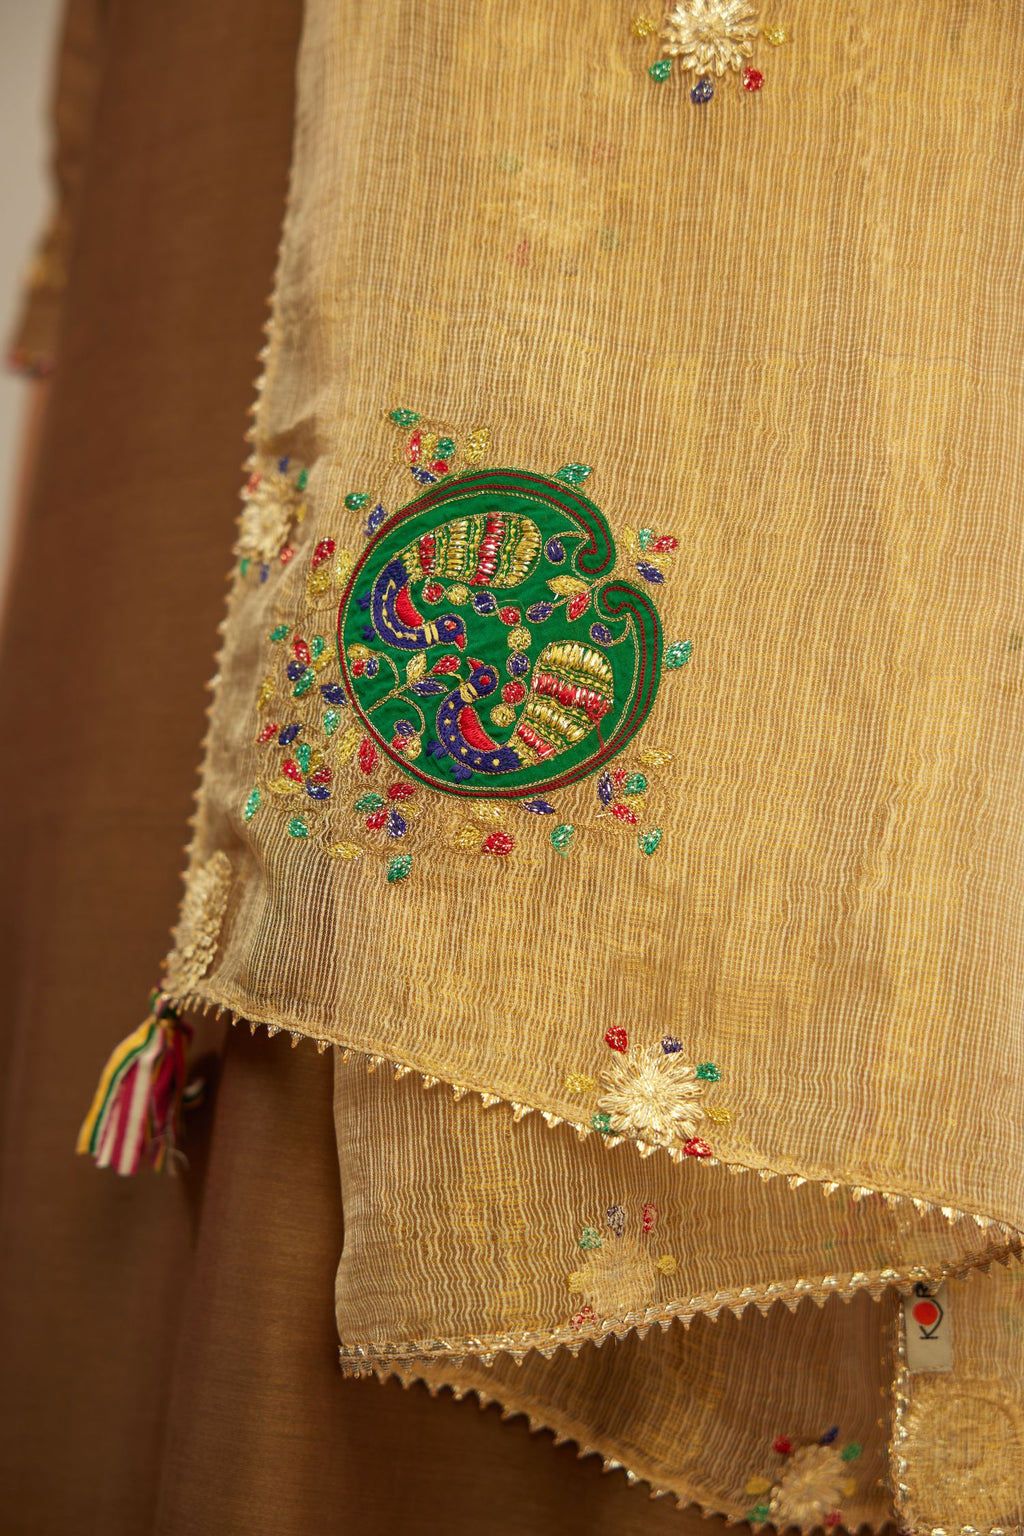 Golden kota doriya dupatta with gota flowers and embroidery all over the dupatta, highlighted with gota lace all around